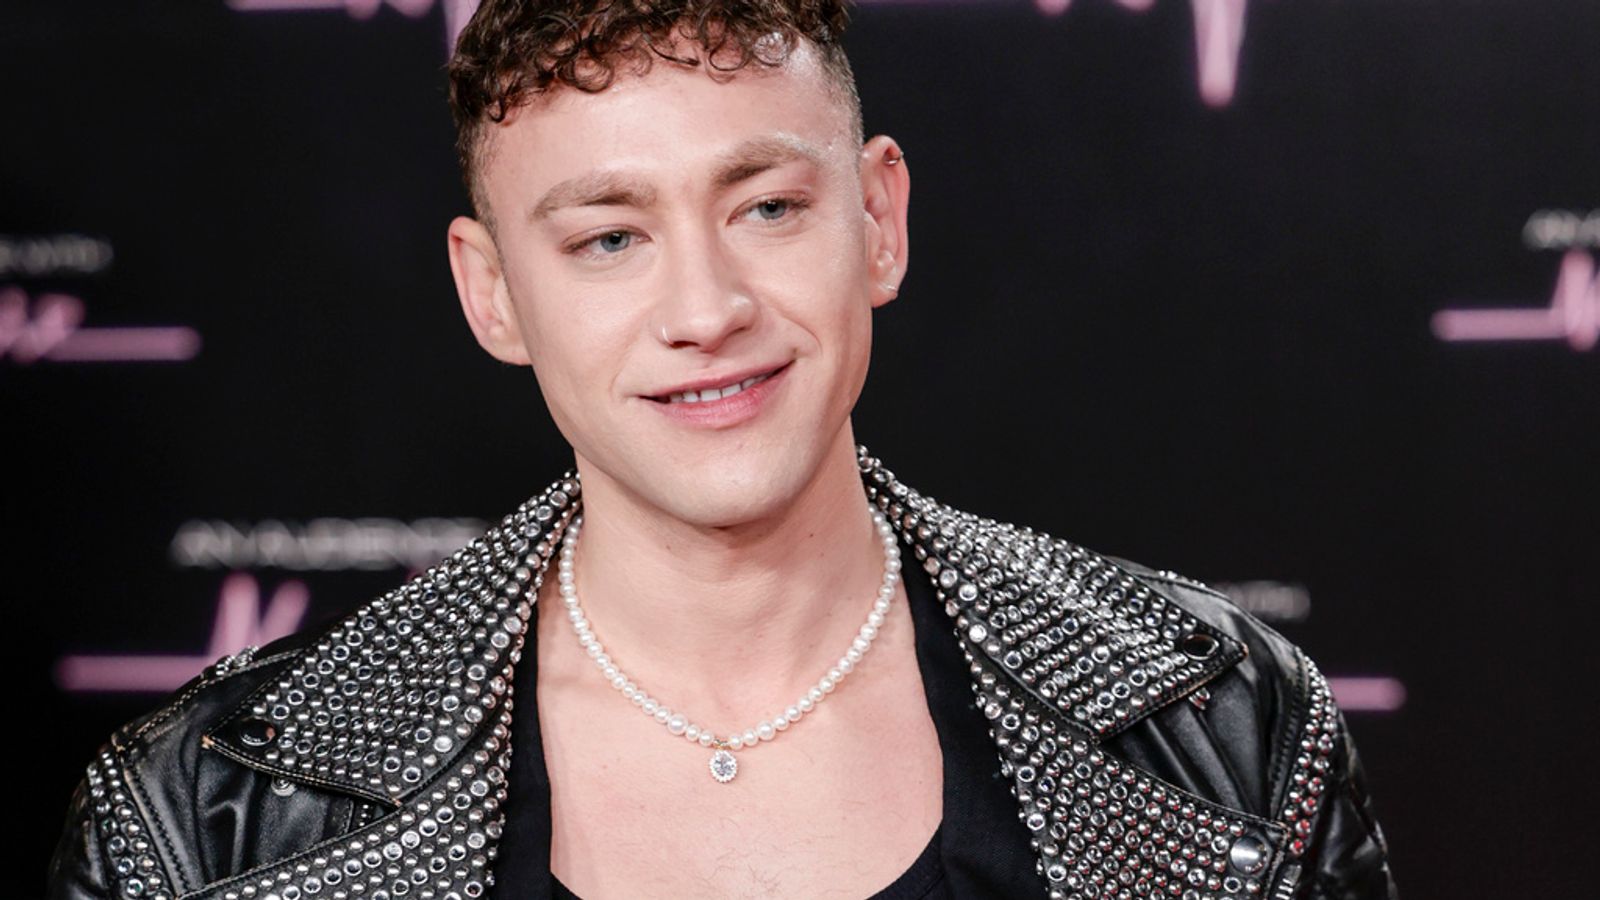 Eurovision: UK act Olly Alexander gives fans a first look at his new single Dizzy